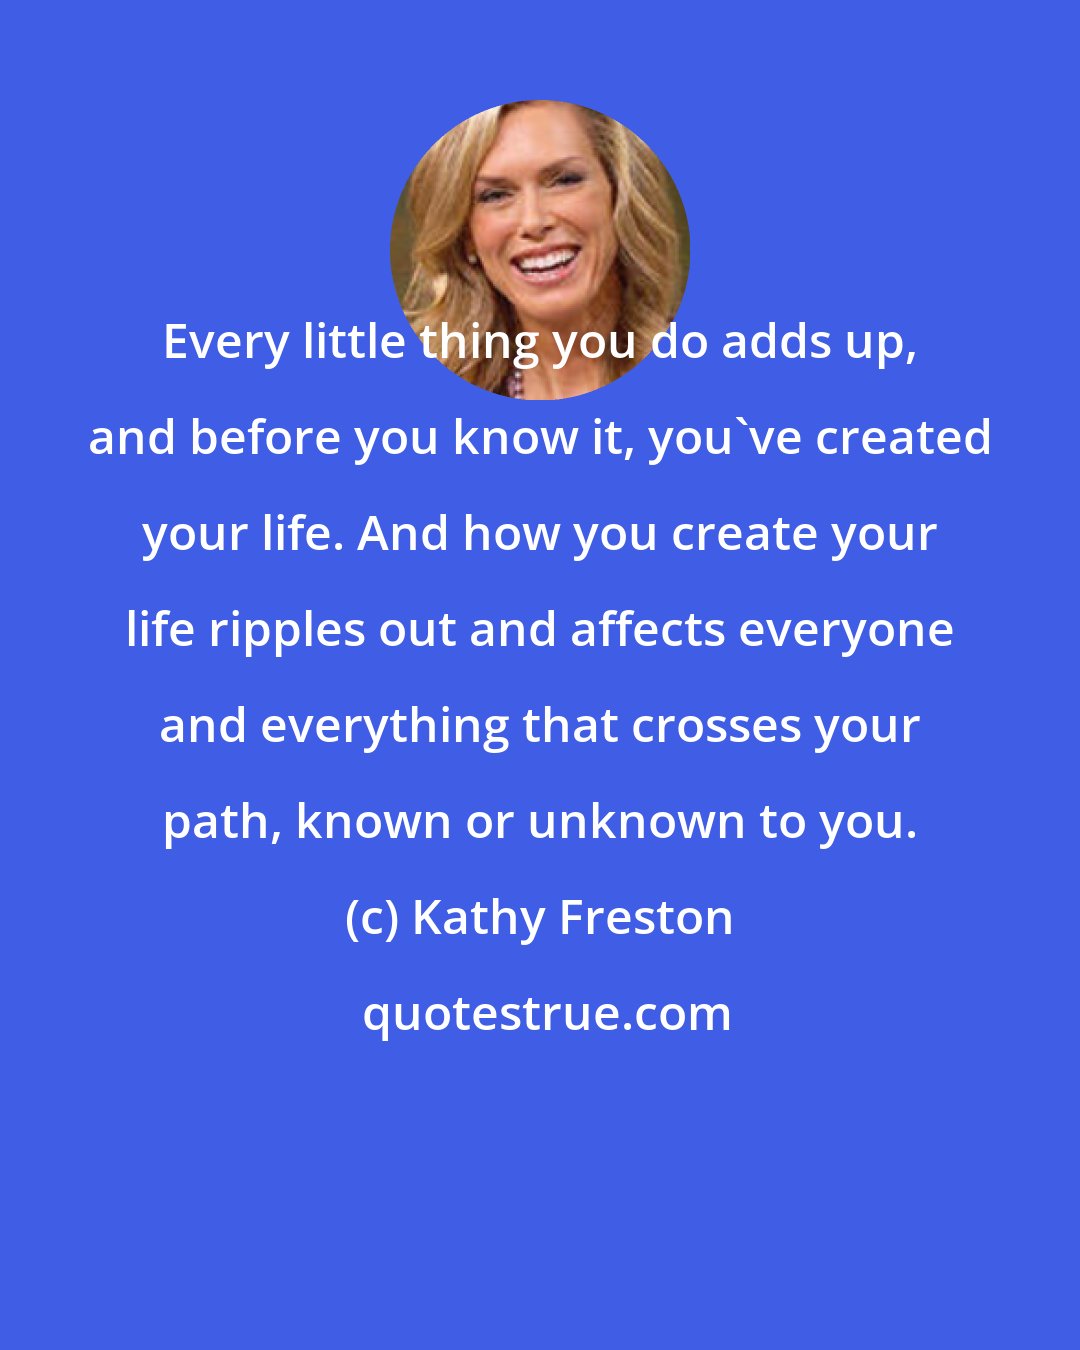 Kathy Freston: Every little thing you do adds up, and before you know it, you've created your life. And how you create your life ripples out and affects everyone and everything that crosses your path, known or unknown to you.